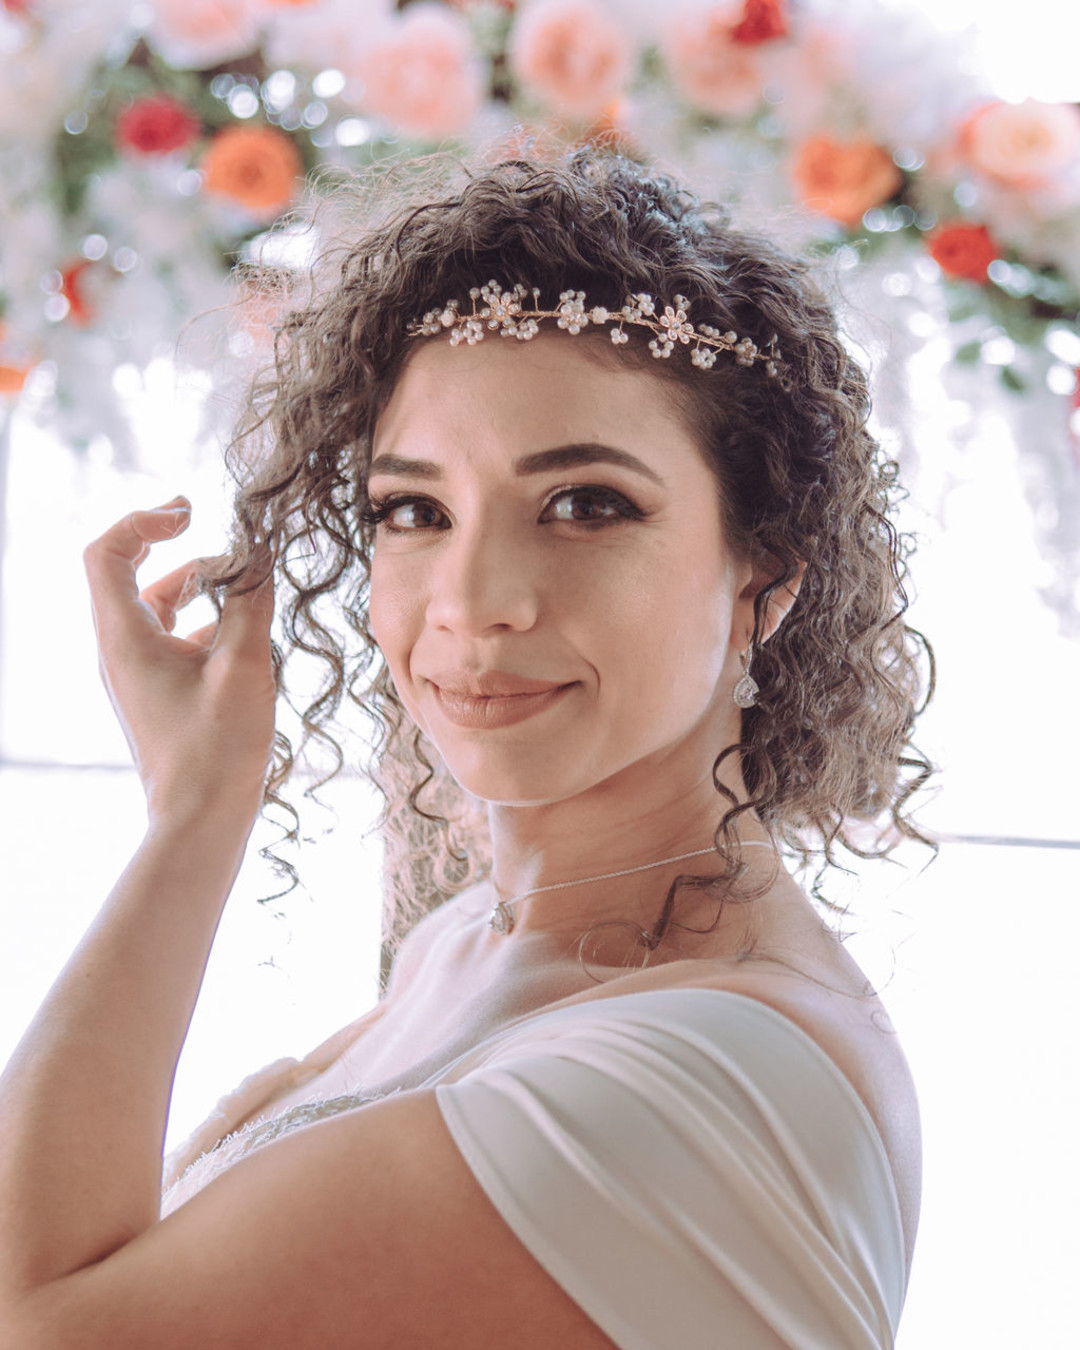 Bridal hair and makeup: Bohemian wedding inspiration captured by Truly Sublime Photography. See more boho wedding ideas on CHItheeWED.com! 